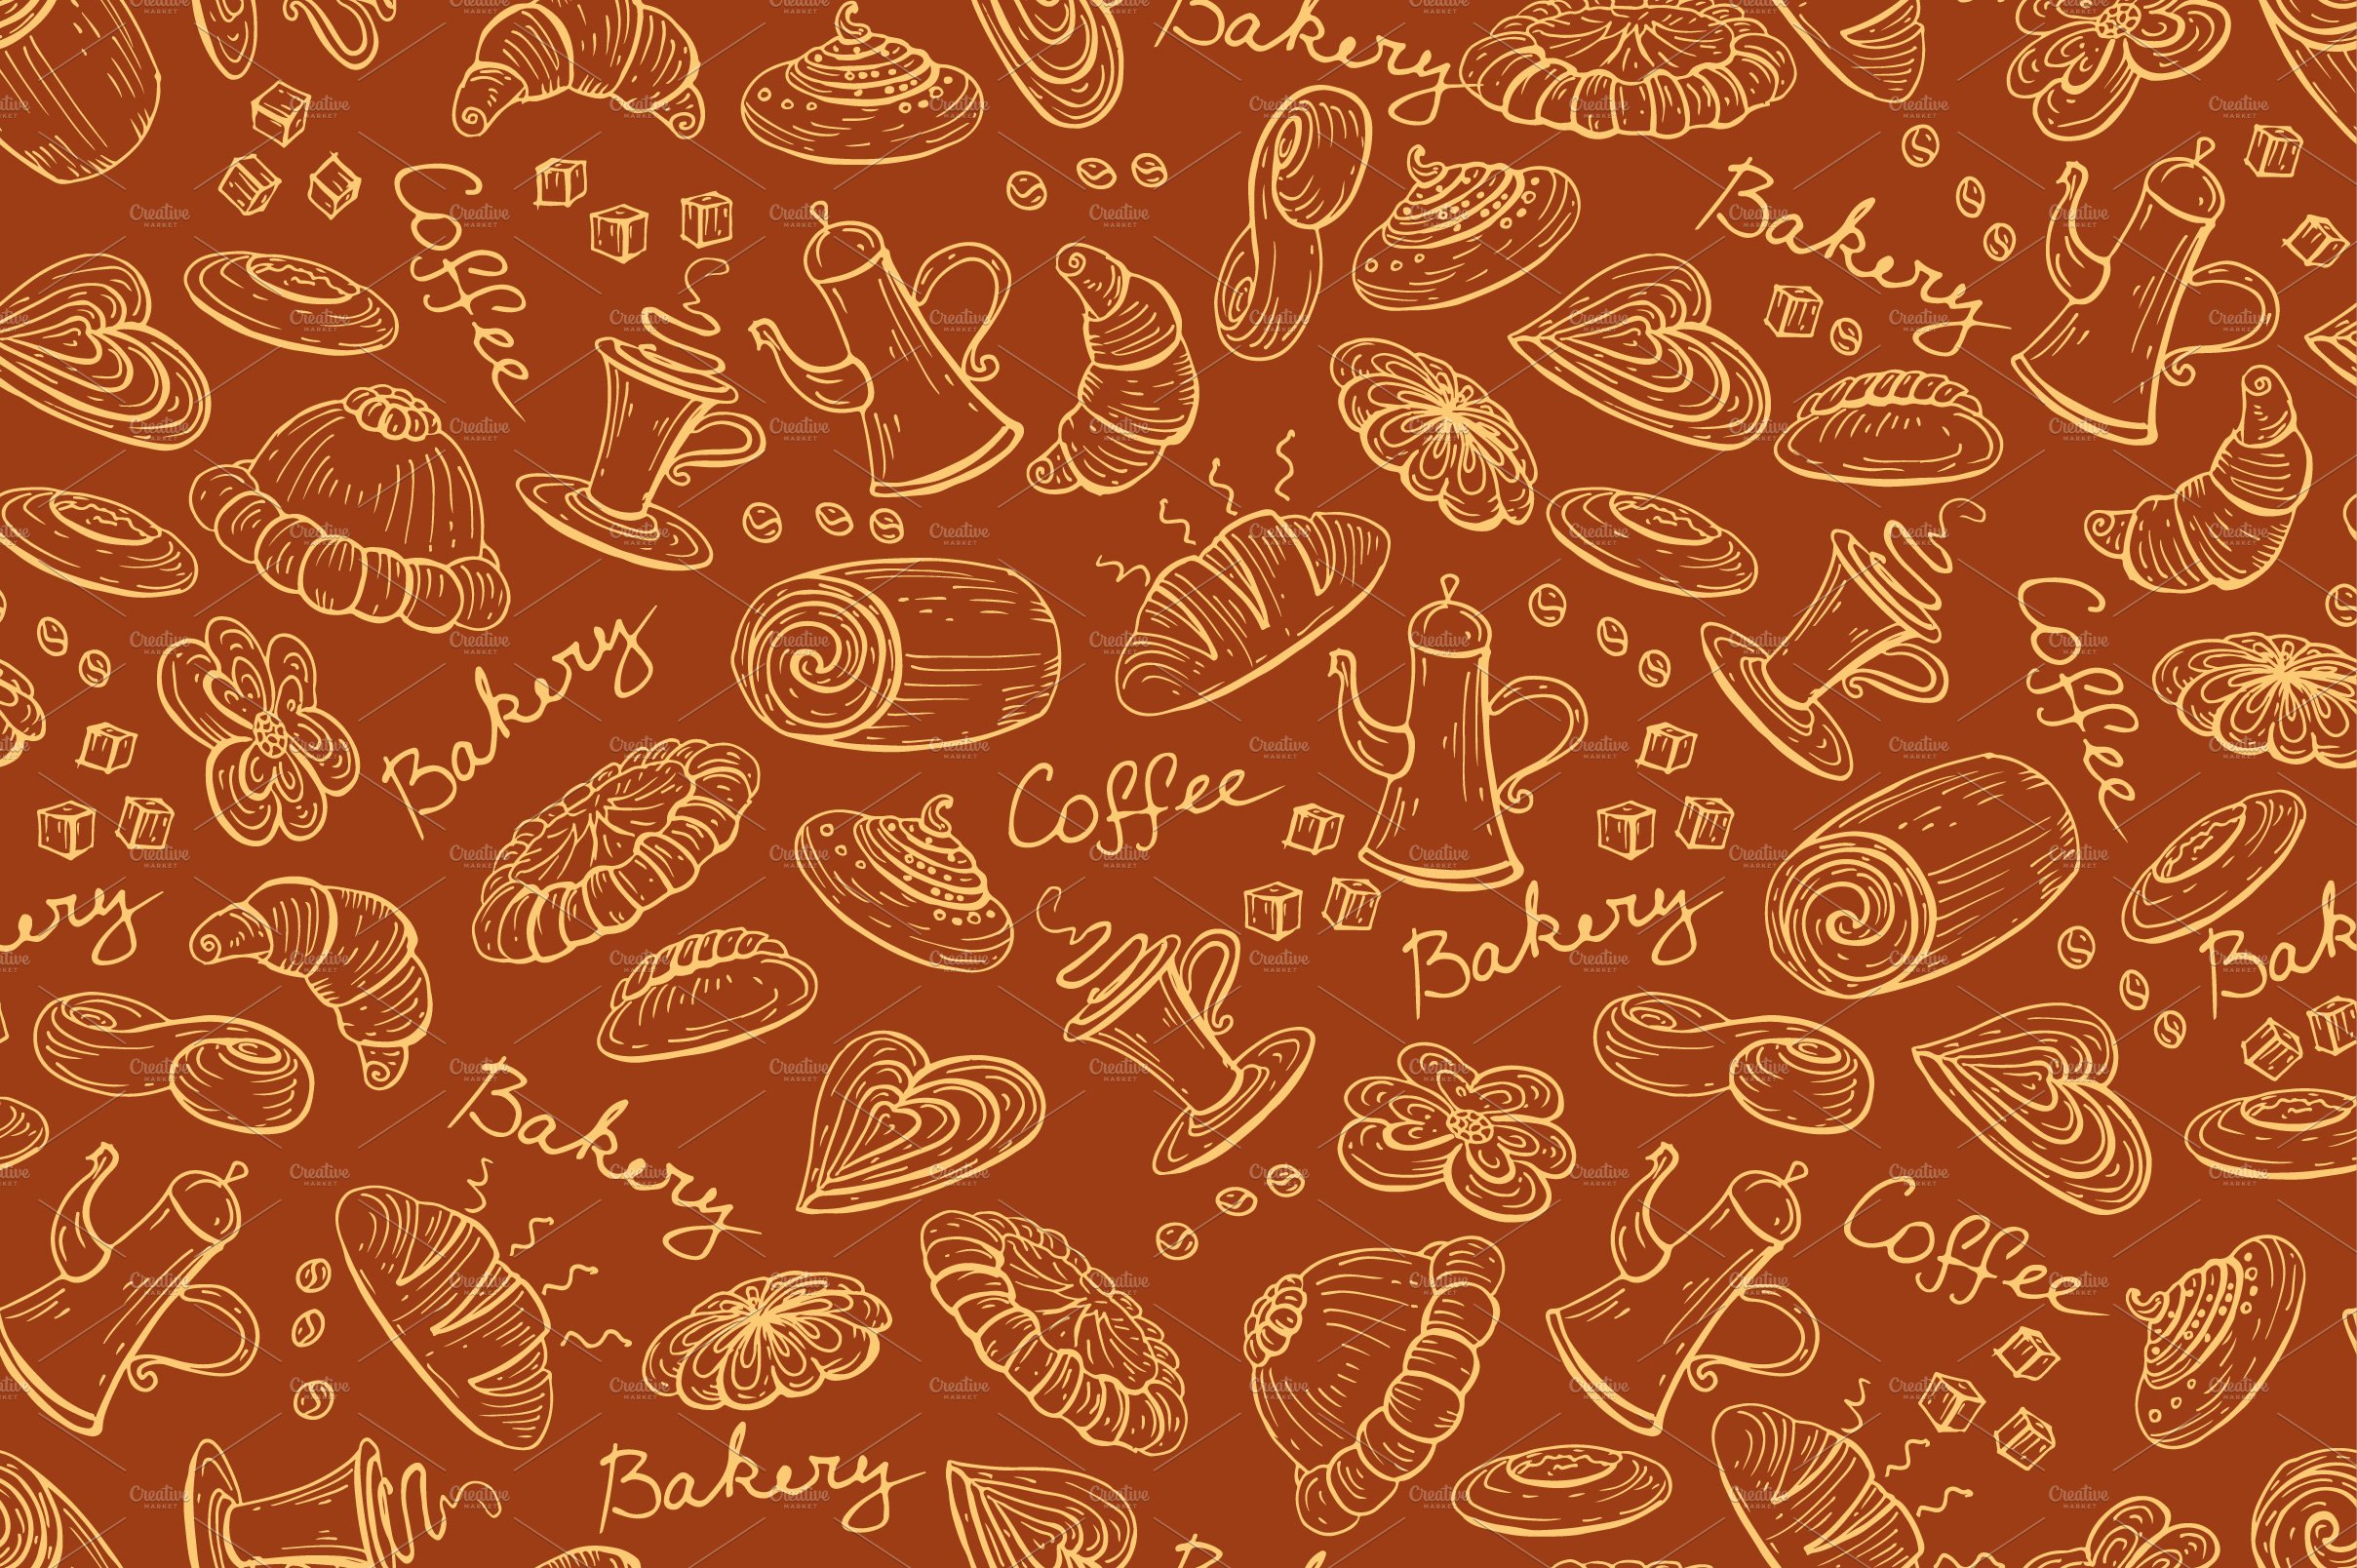 Pattern with bread bakery products cover image.